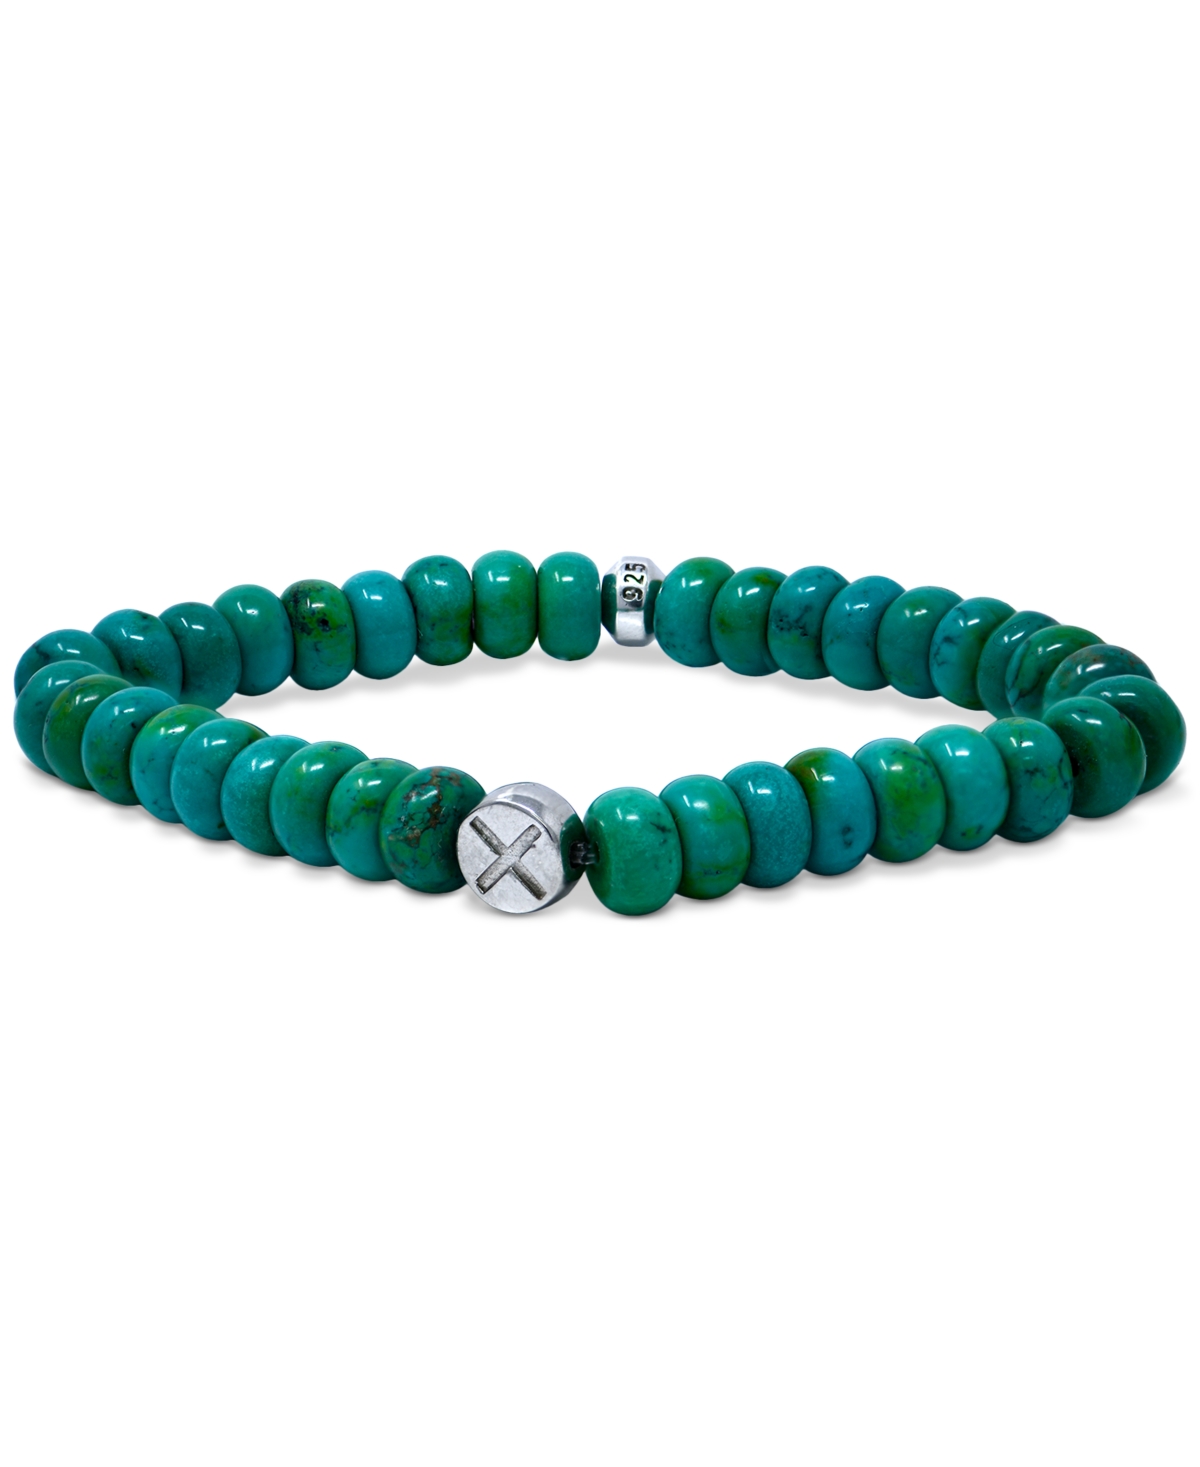 Green Turquoise Bead Stretch Bracelet in Sterling Silver - Green Turquoise